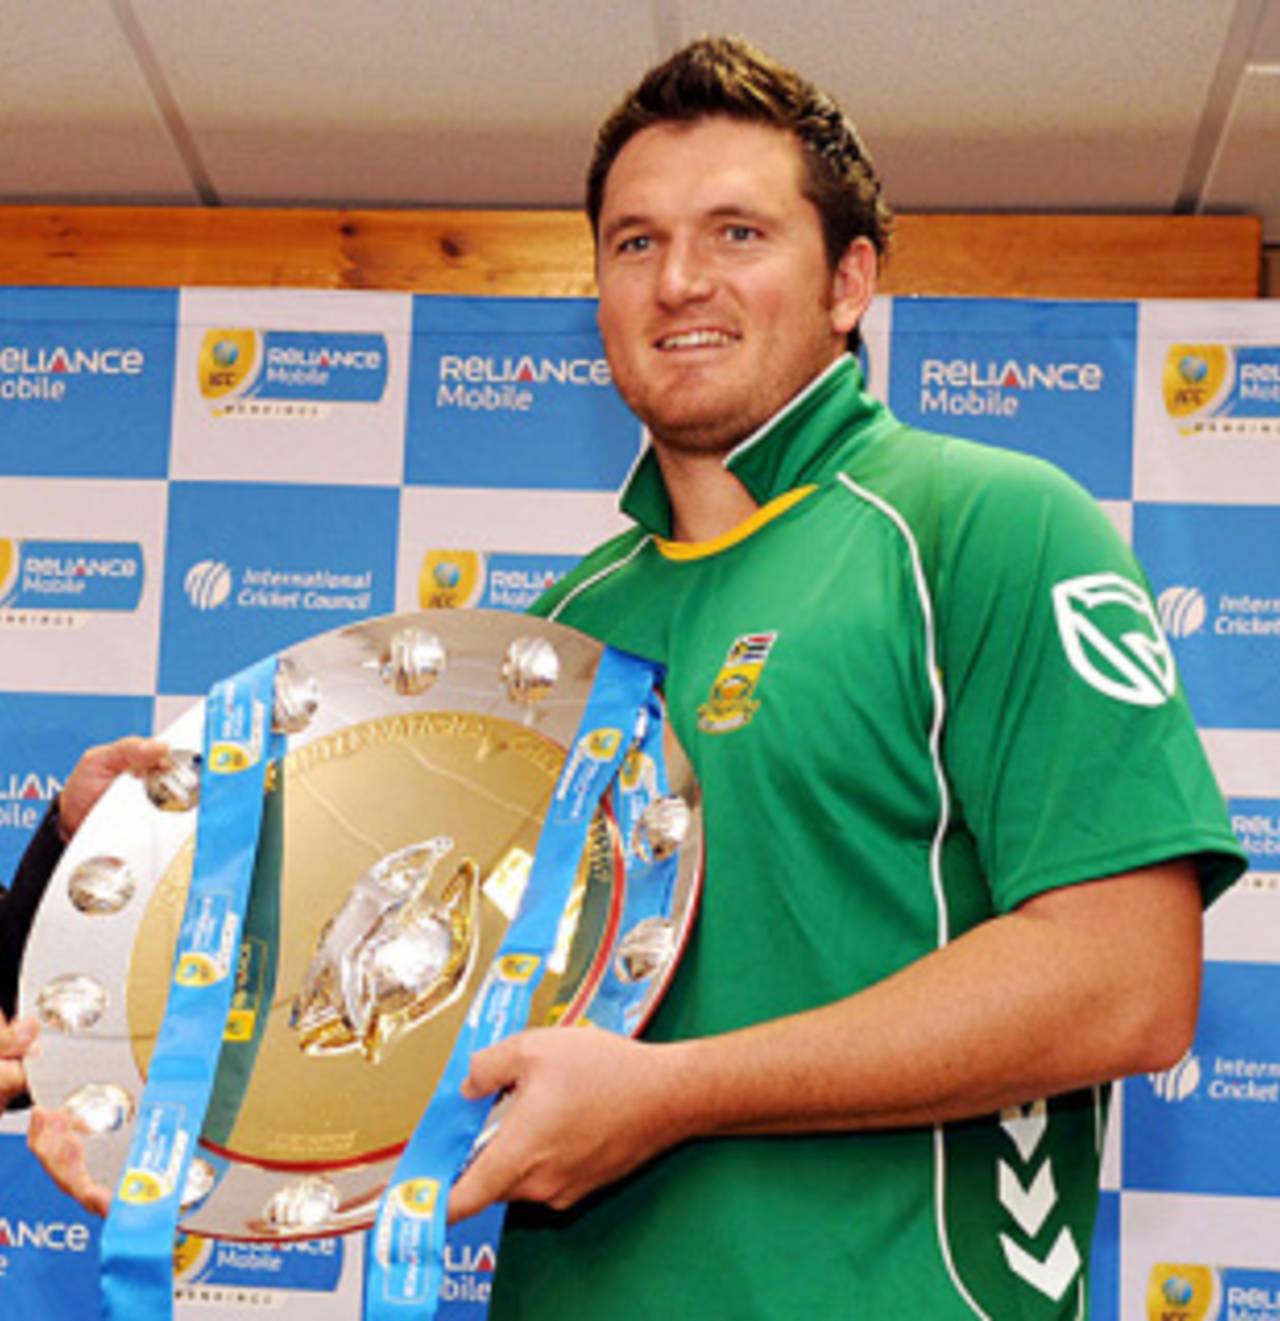 Graeme Smith is presented with the ICC ODI Championship Shield at a ceremony in Johannesburg, March 25, 2009